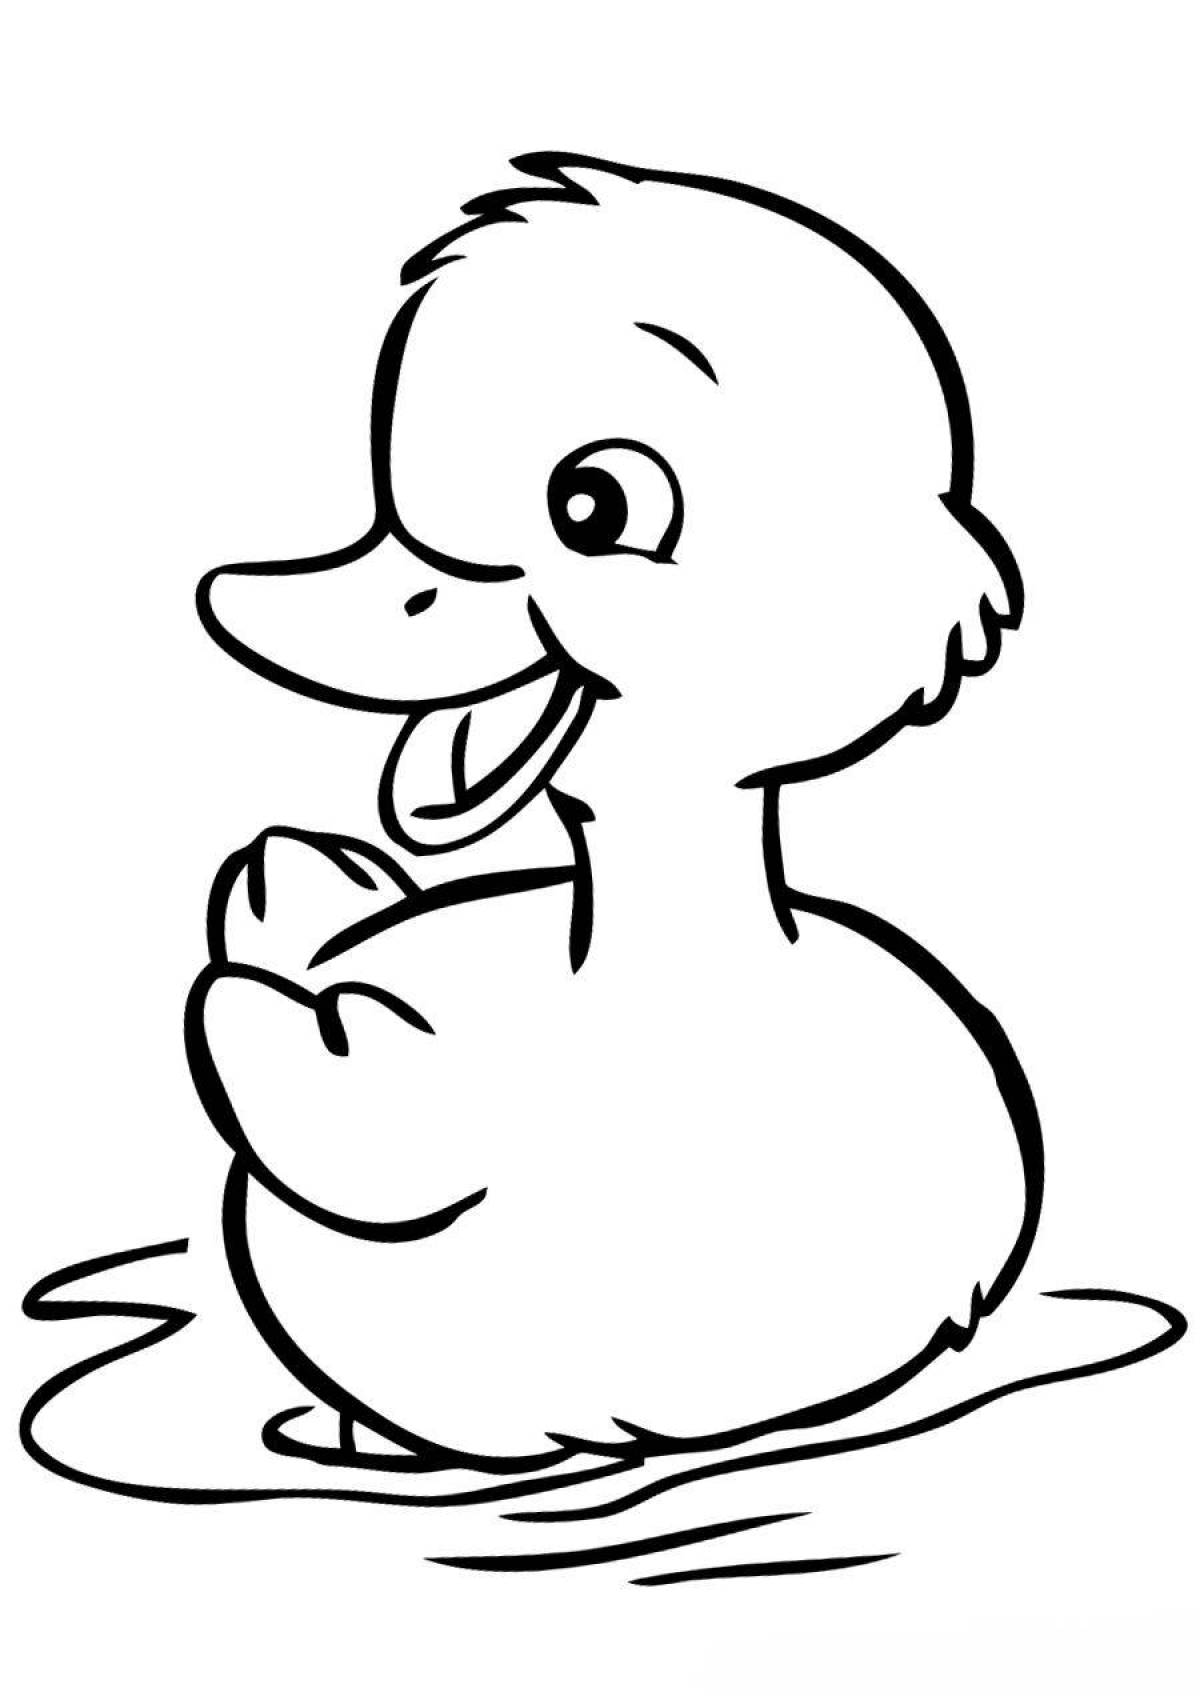 Animated lalofan duck coloring page